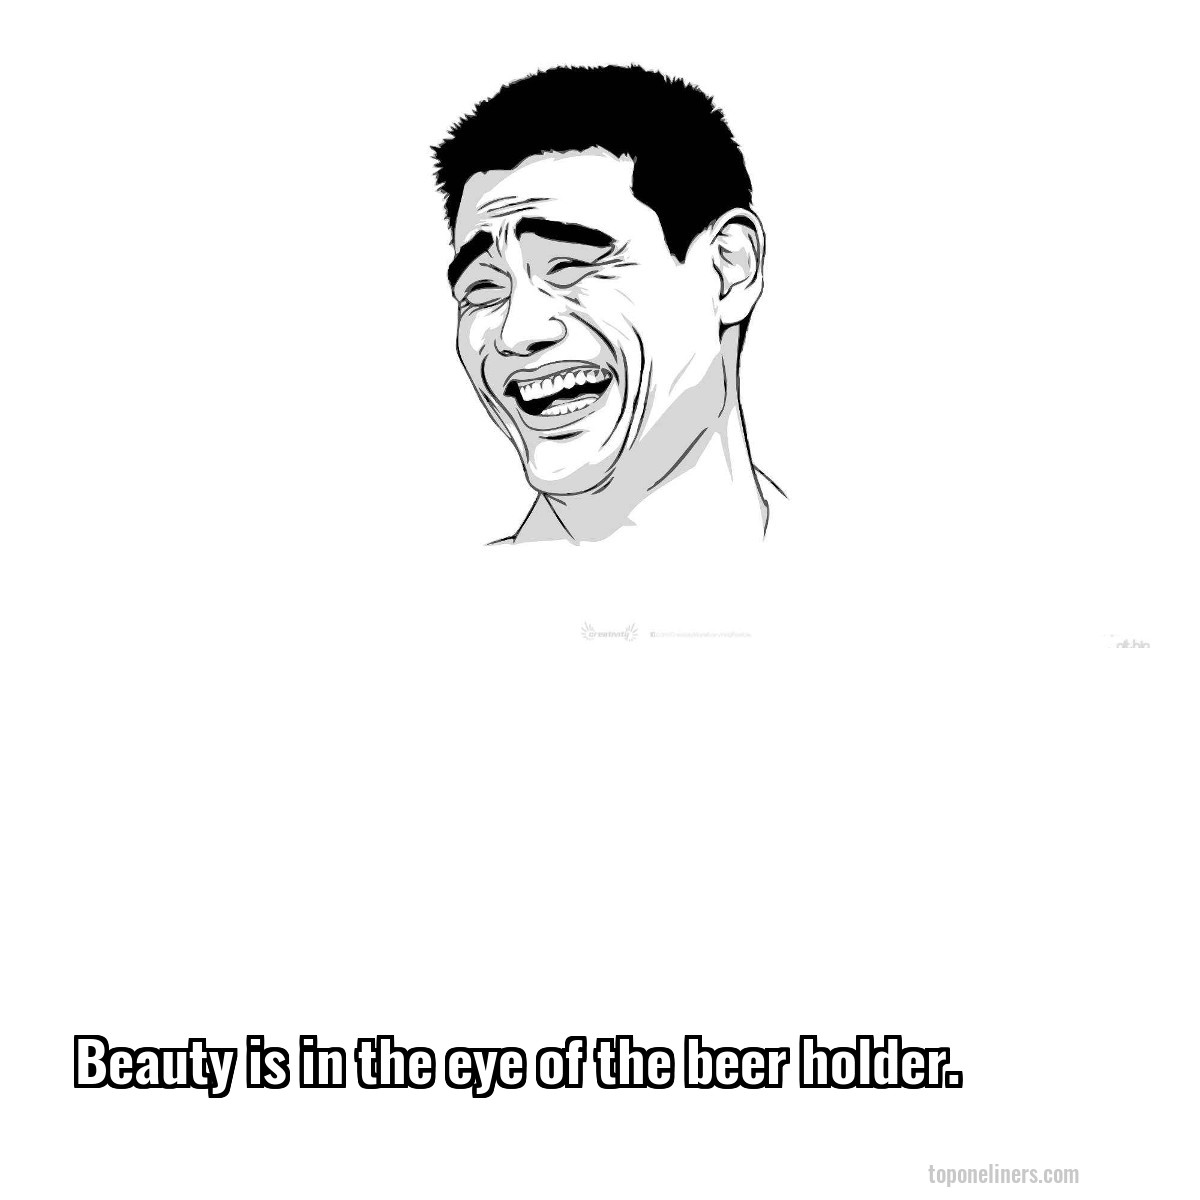 Beauty is in the eye of the beer holder.
